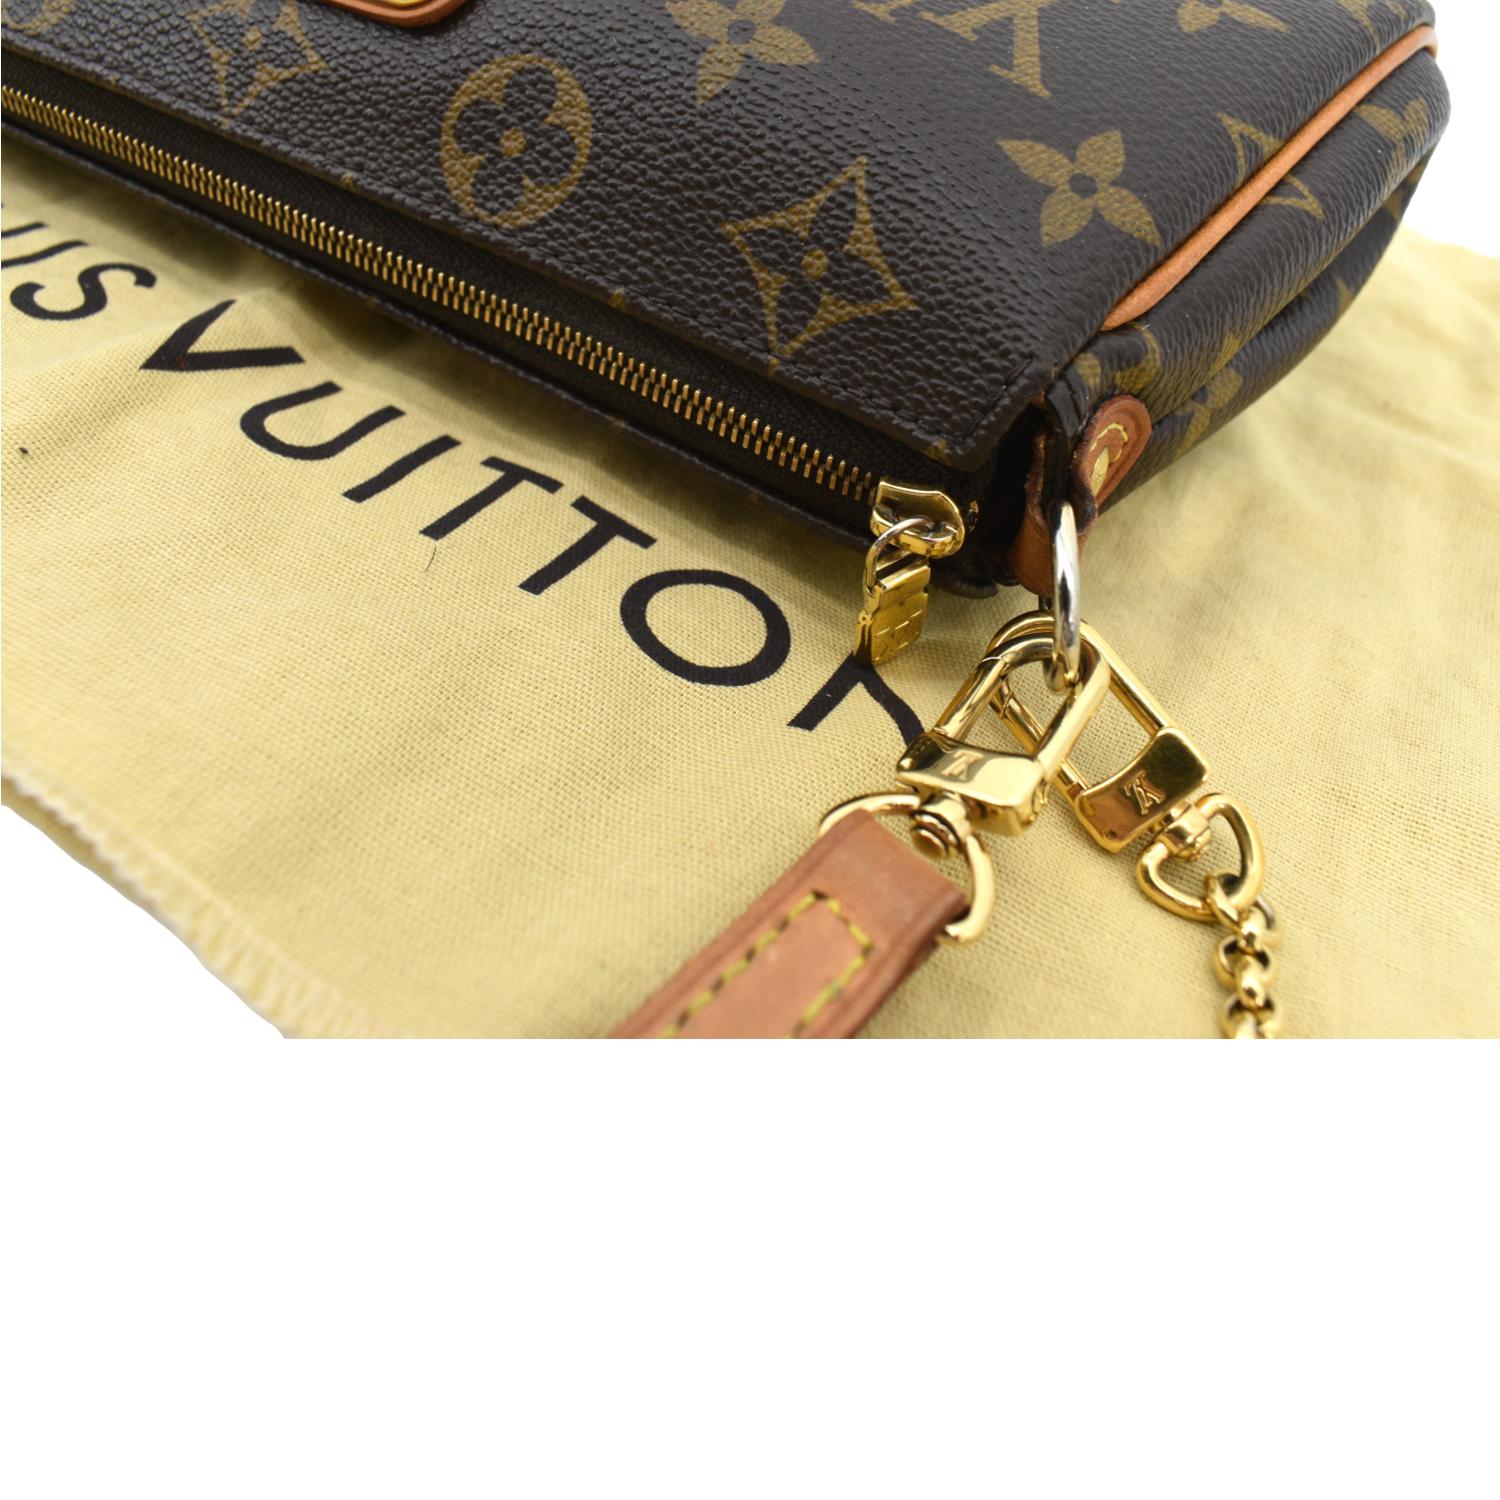 Félicie Pochette Other Monogram Canvas - Wallets and Small Leather Goods